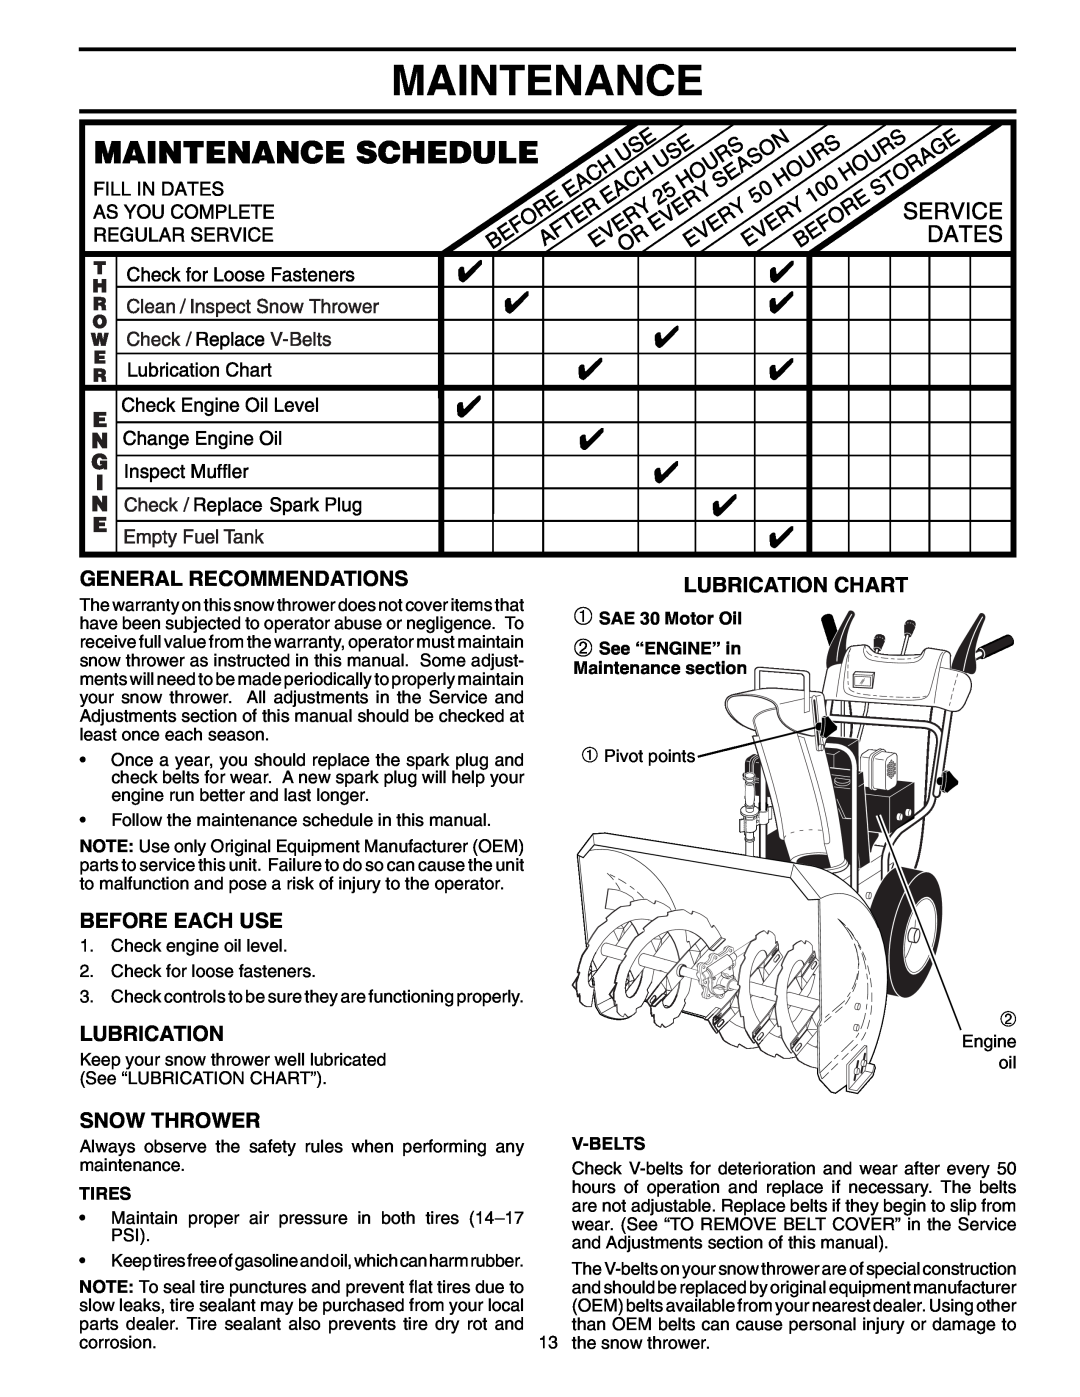 Poulan 199375 Maintenance, General Recommendations, Before Each Use, Lubrication Chart, Snow Thrower, Tires, V-Belts 